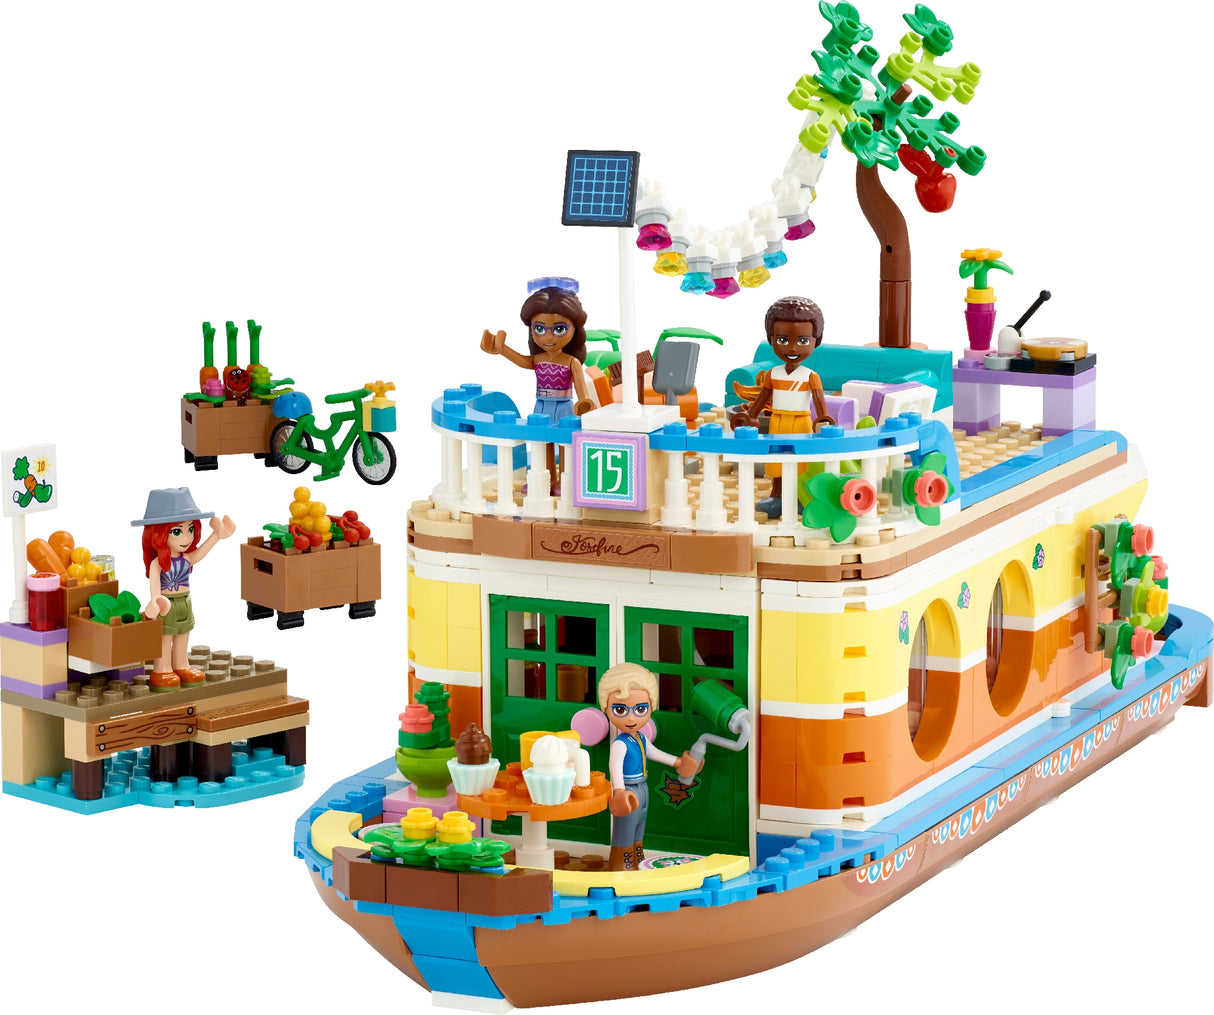 LEGO FRIENDS CANAL HOUSEBOAT 41702 AGE: 7+